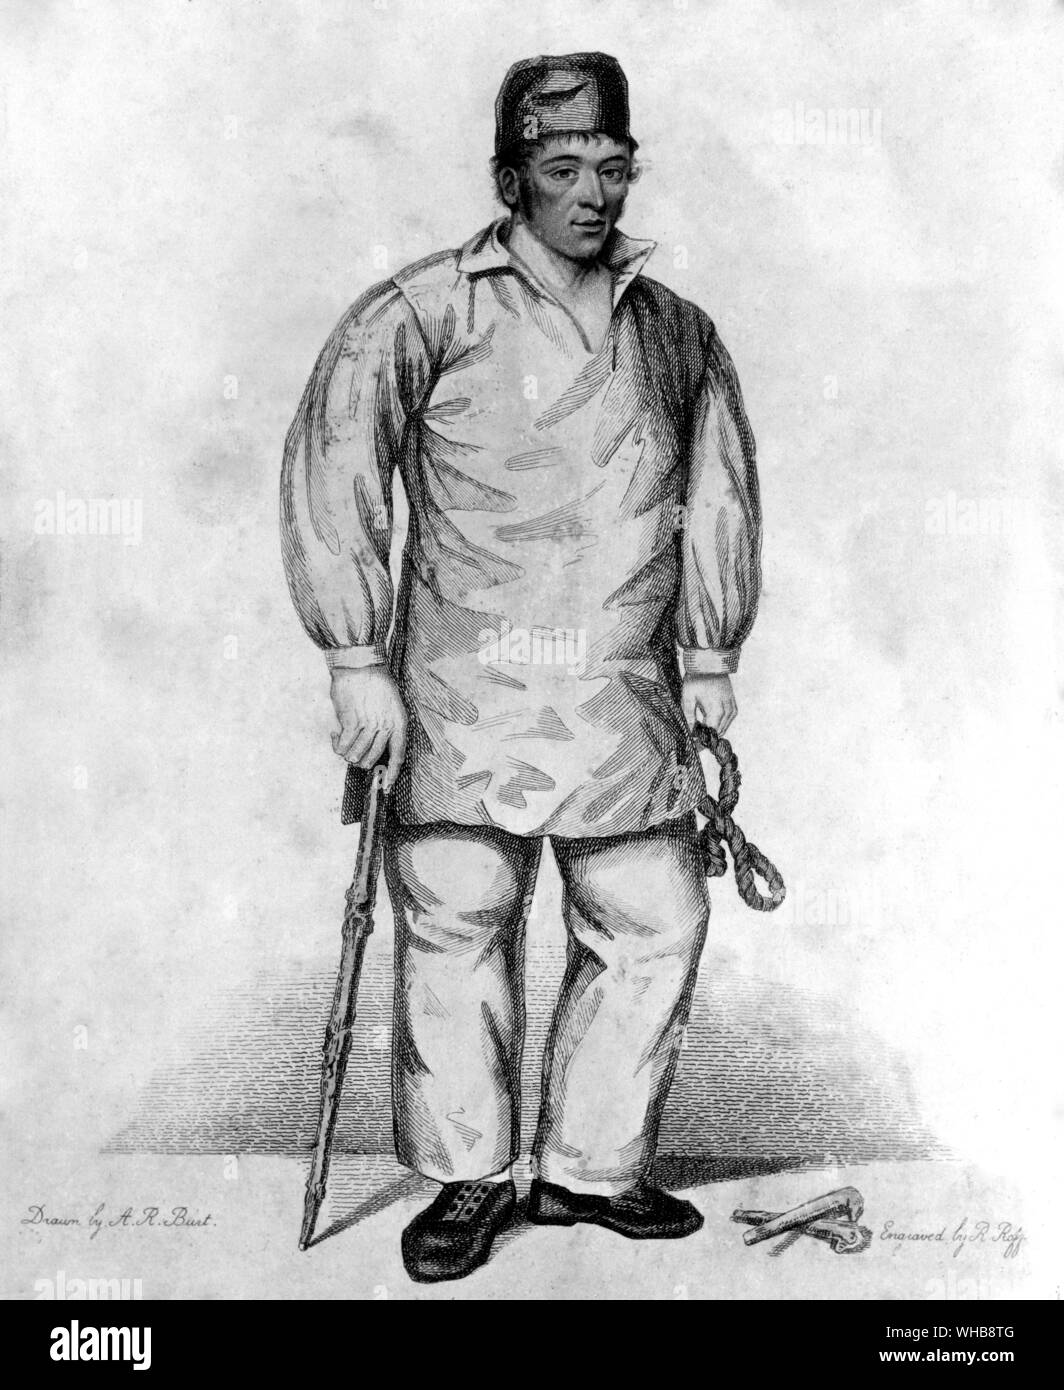 John Evans who was buried without food or light, during the space of 12 days and nights in a coalpit, near Wrexam 120 yards below the surface of the earth, 27 September 1819, engraved by R. C. Roffe after A. R. Burt Department of Industry, The National Museum of Wales, Cardiff.. Stock Photo